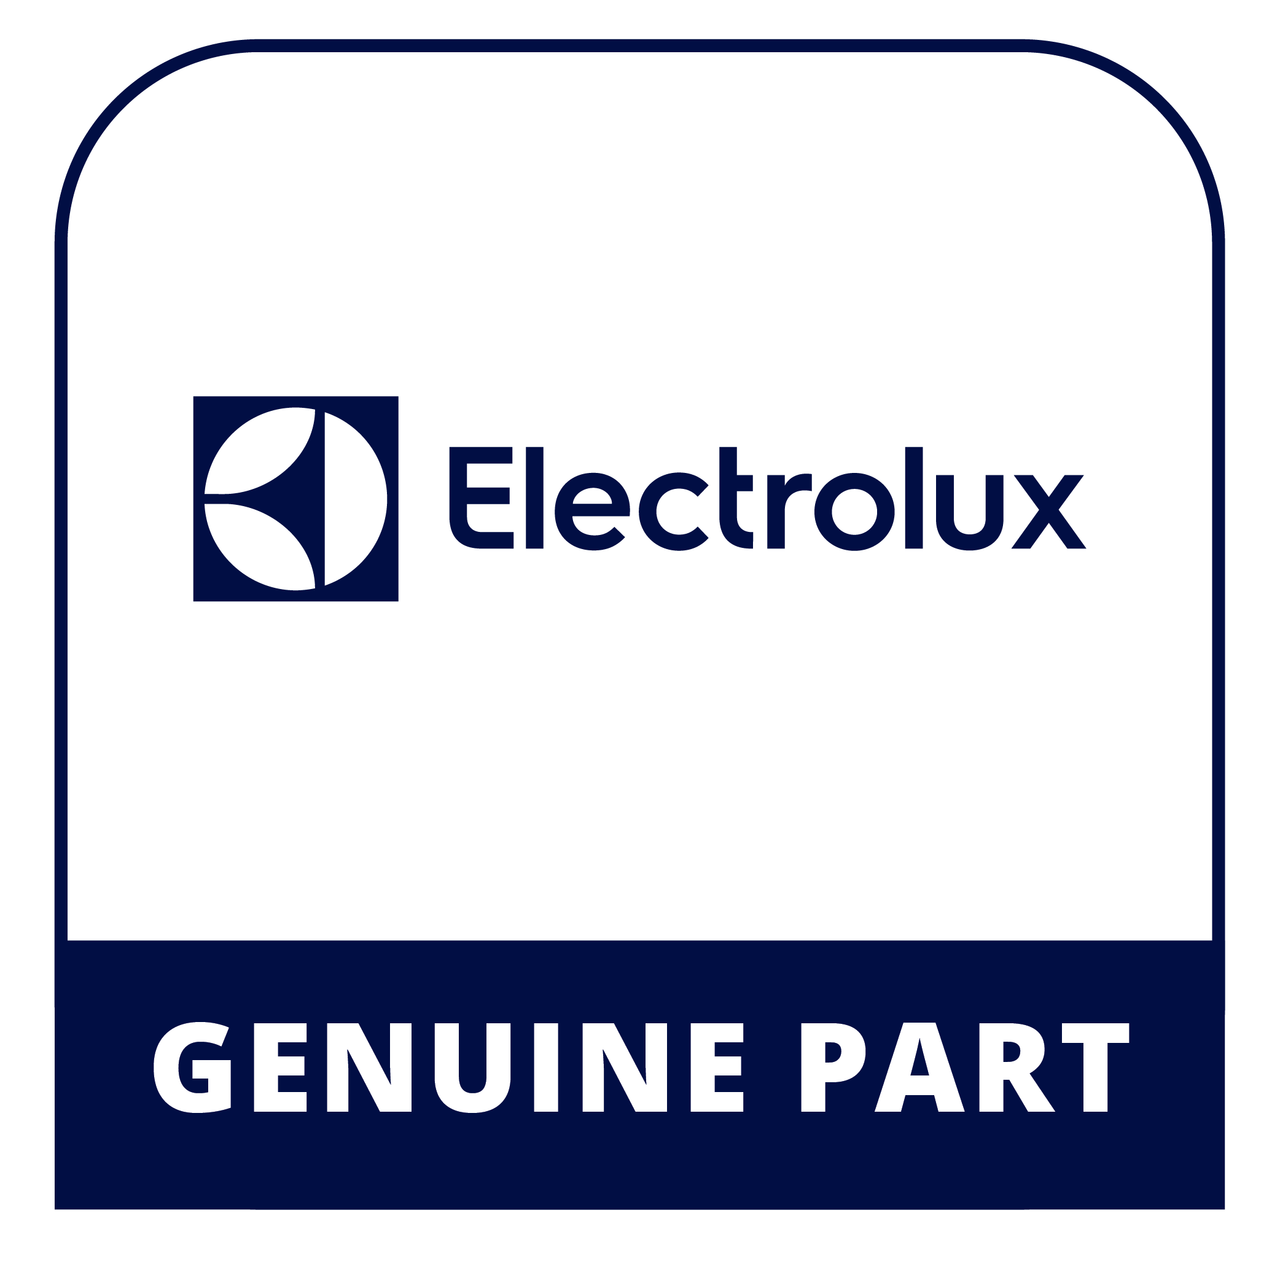 Frigidaire - Electrolux 316495108 Use & Care Guide - Genuine Electrolux Part